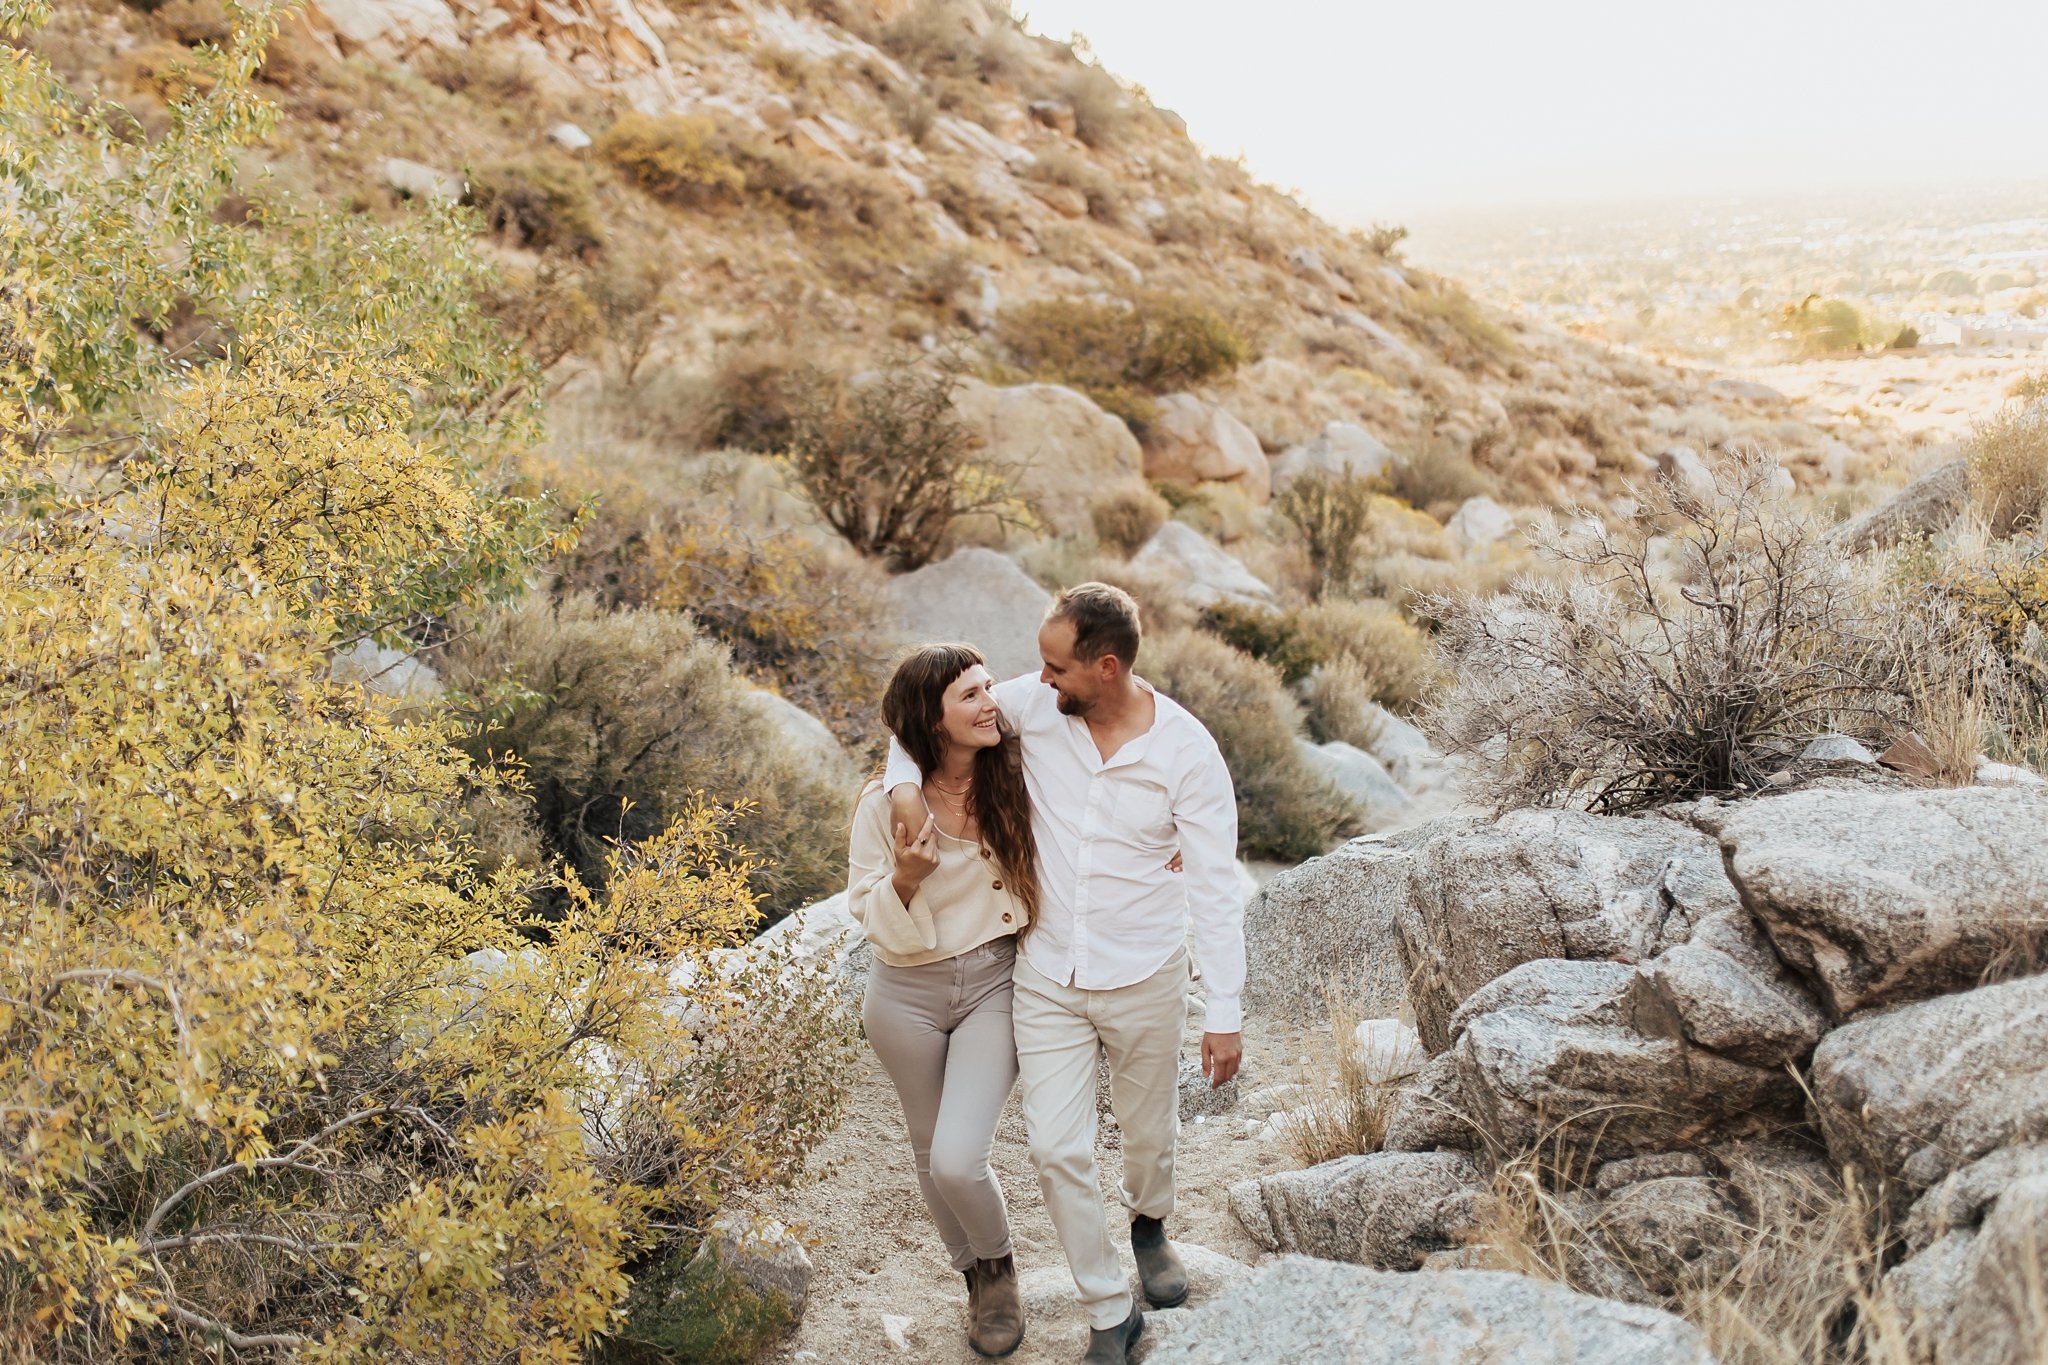 Alicia+lucia+photography+-+albuquerque+wedding+photographer+-+santa+fe+wedding+photography+-+new+mexico+wedding+photographer+-+new+mexico+wedding+-+desert+engagement+-+foothills+engagement+-+mountain+engagement_0020.jpg